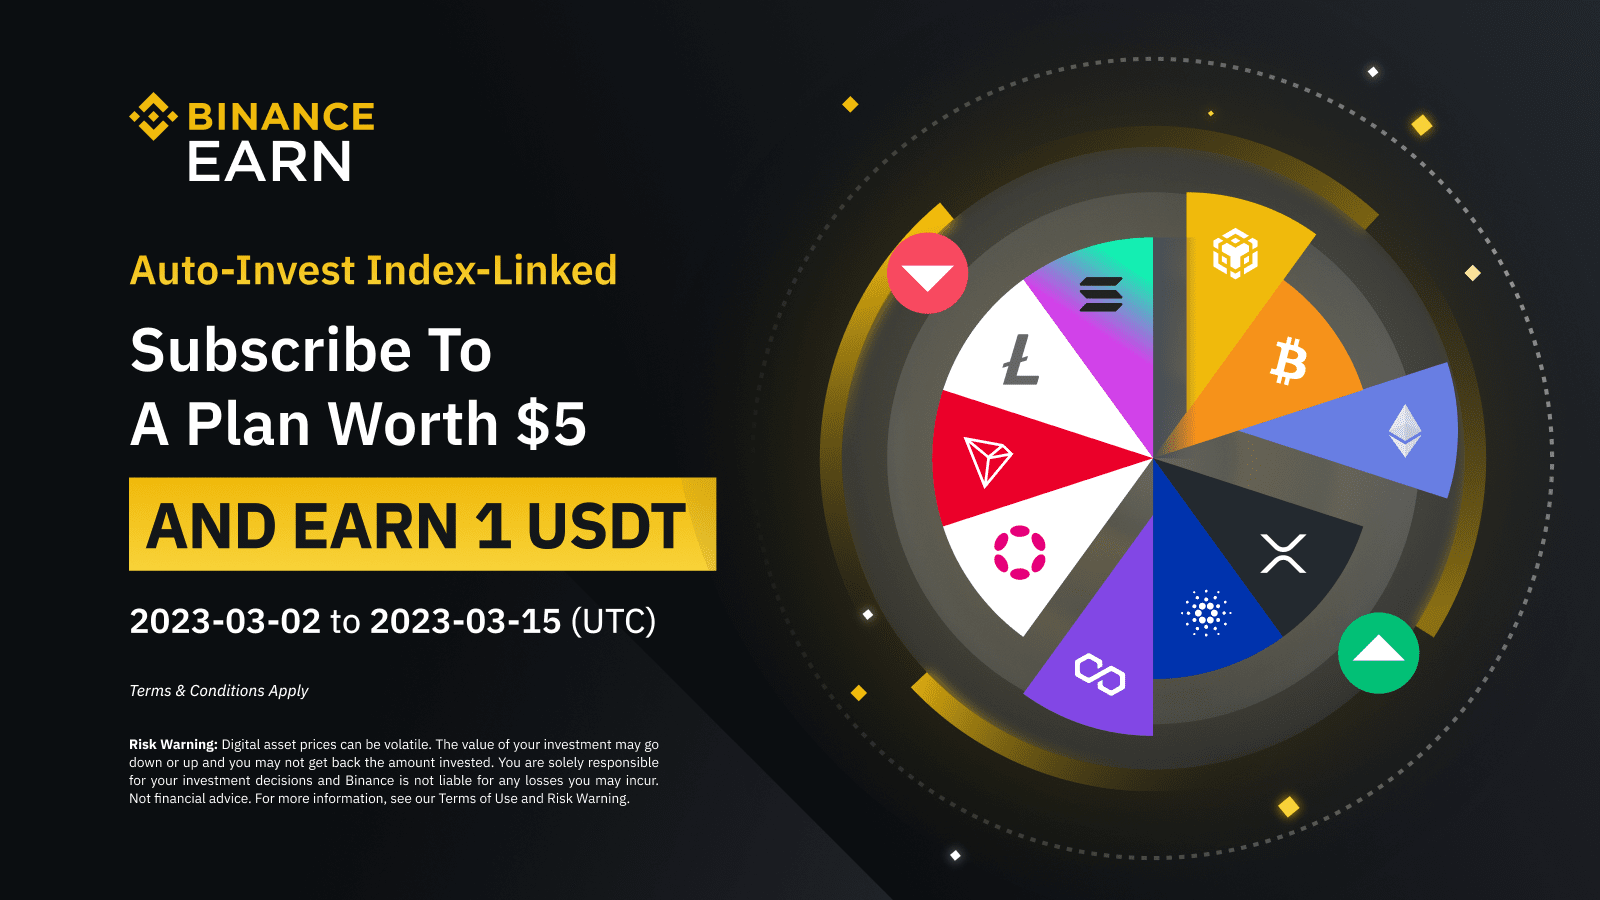 Create An Auto-Invest Index-Linked Plan Now To Earn 1 Usdt - Binance |  Coincarp